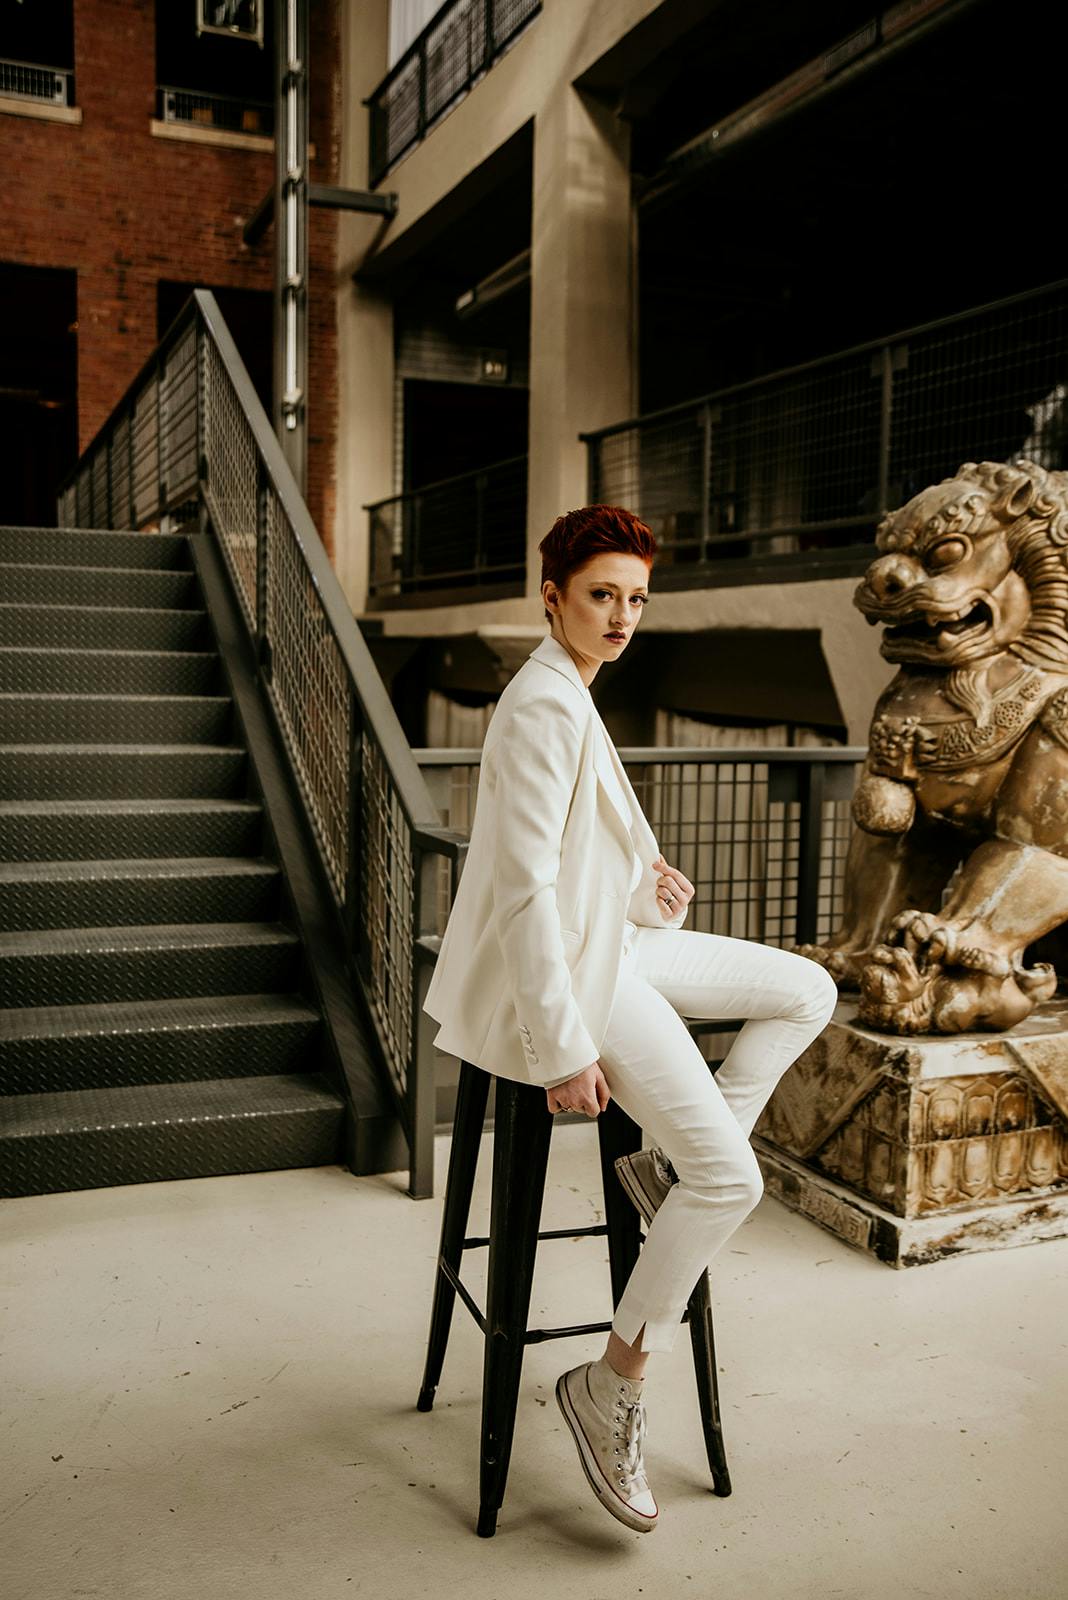 Androgynous woman in women's white tuxedo paired with white converse for a suit and sneakers casual look as a fashionable women's office outfit.